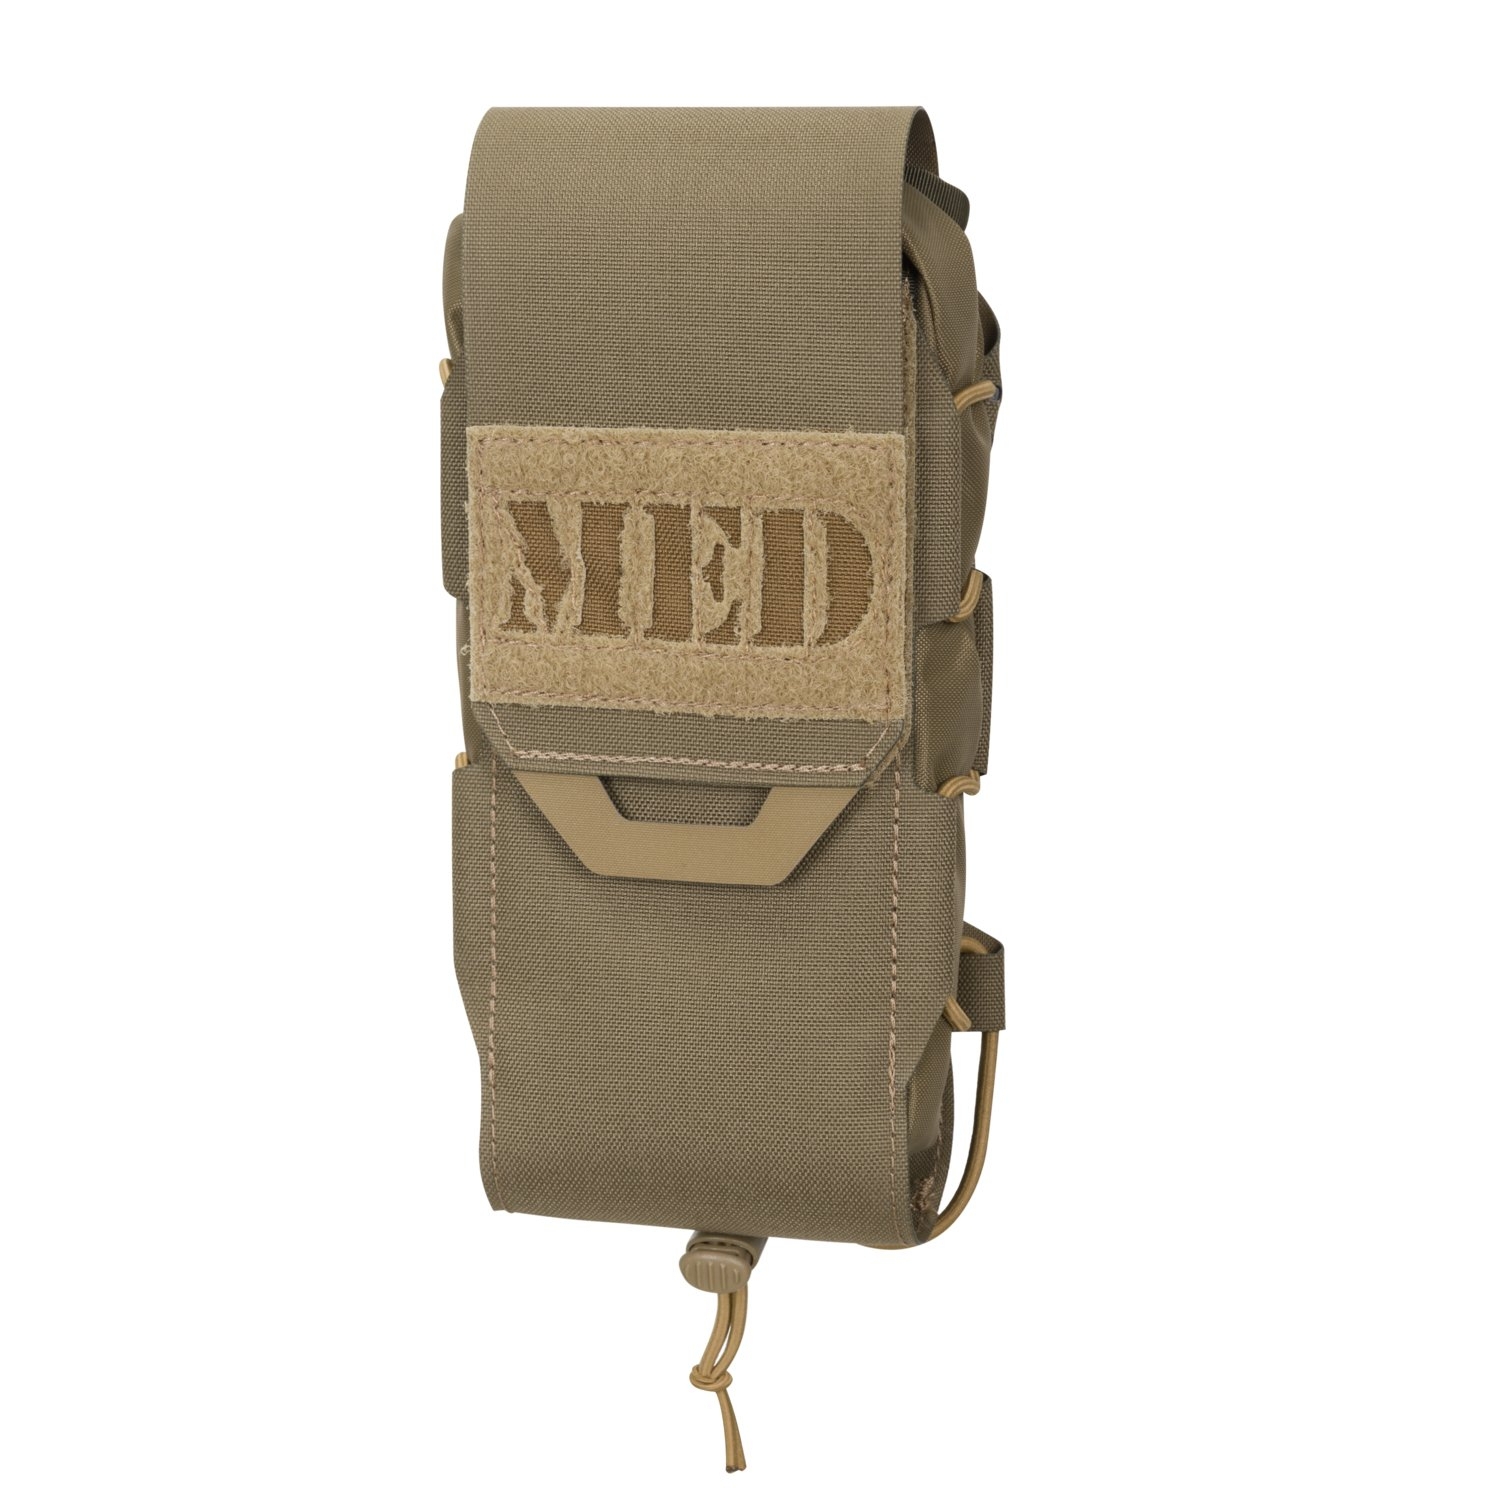 Image of apteczka direct action pouch vertical mk ii - cordura - adaptive green - one size (po-mdv2-cd5-agr)